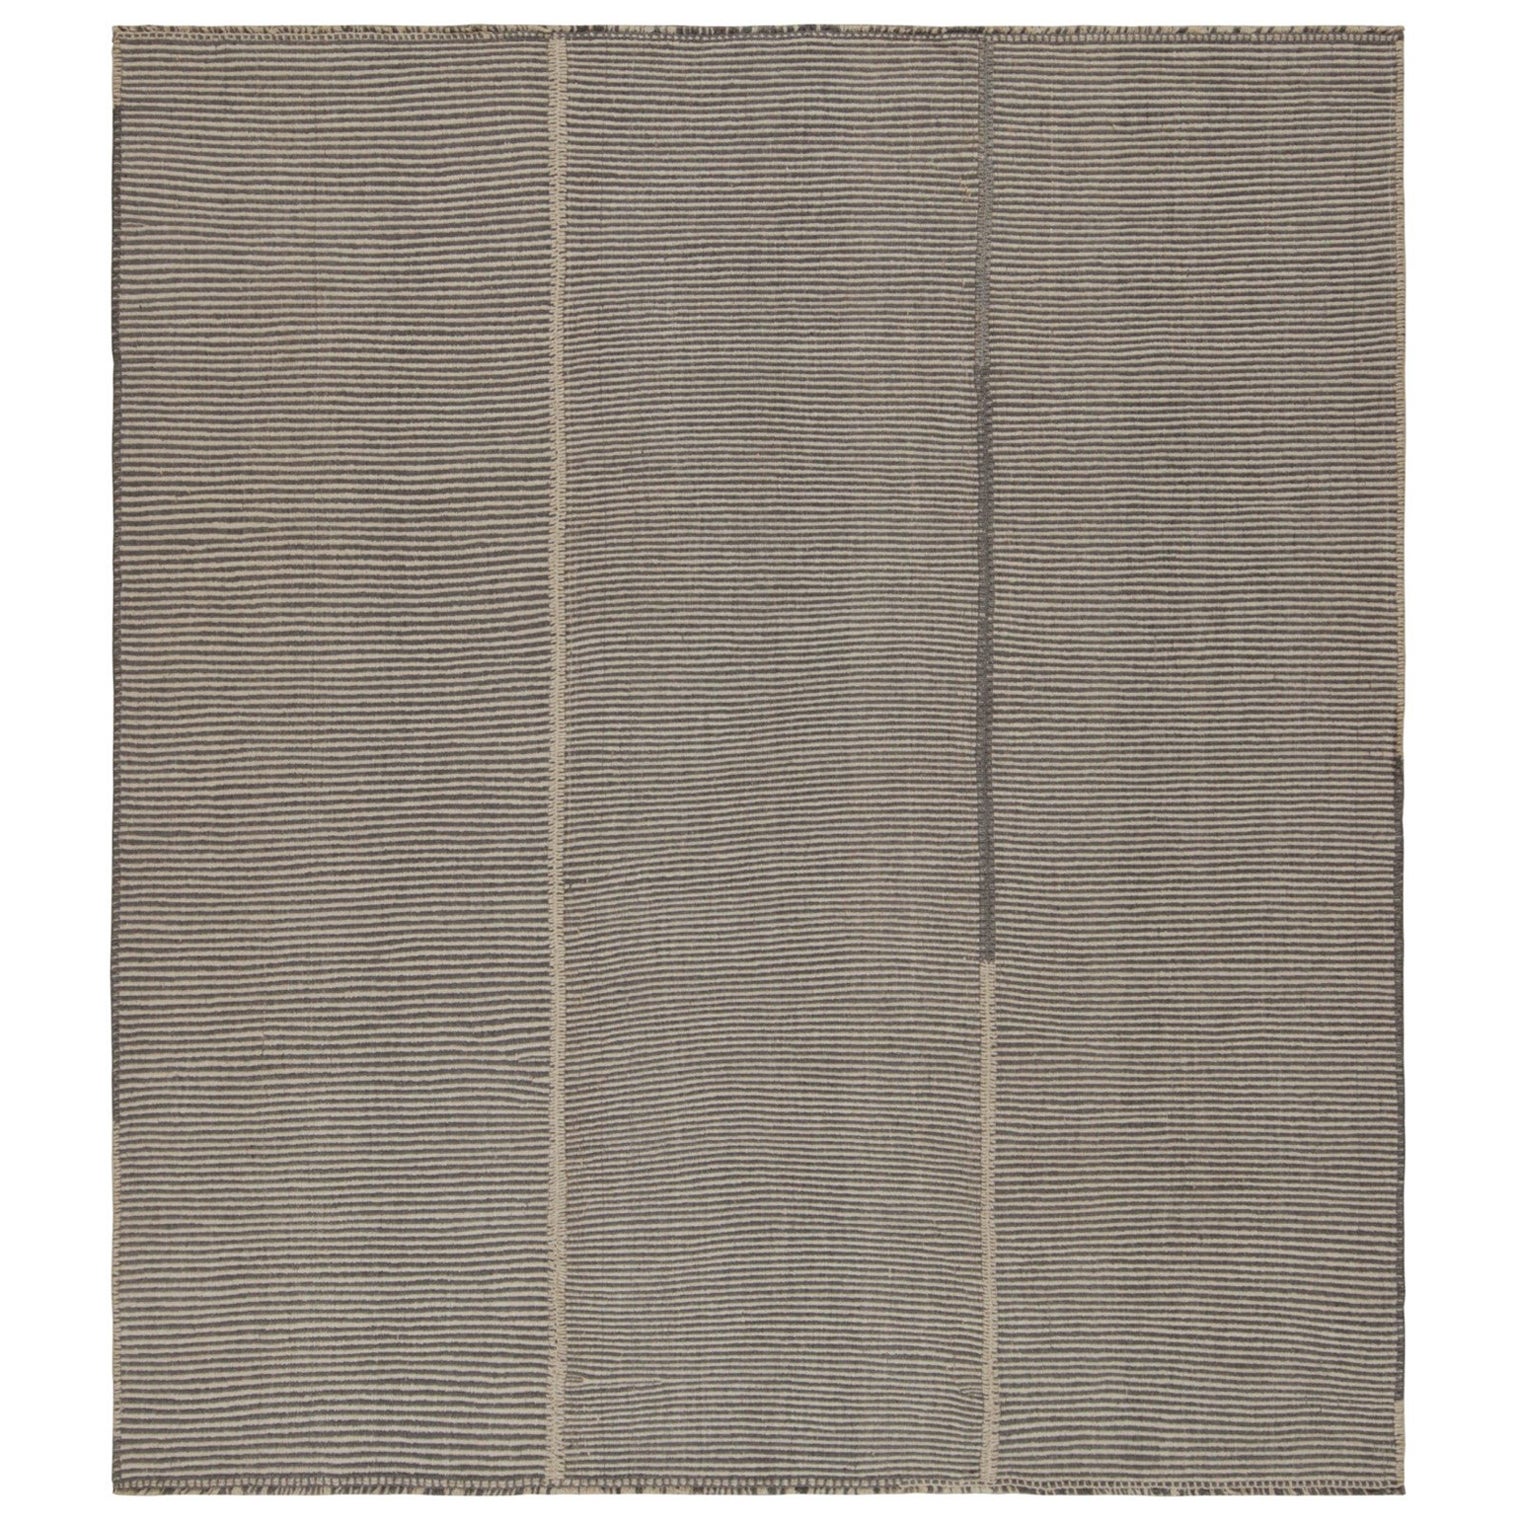 Rug & Kilim’s Contemporary Kilim in Beige and Gray Stripes For Sale